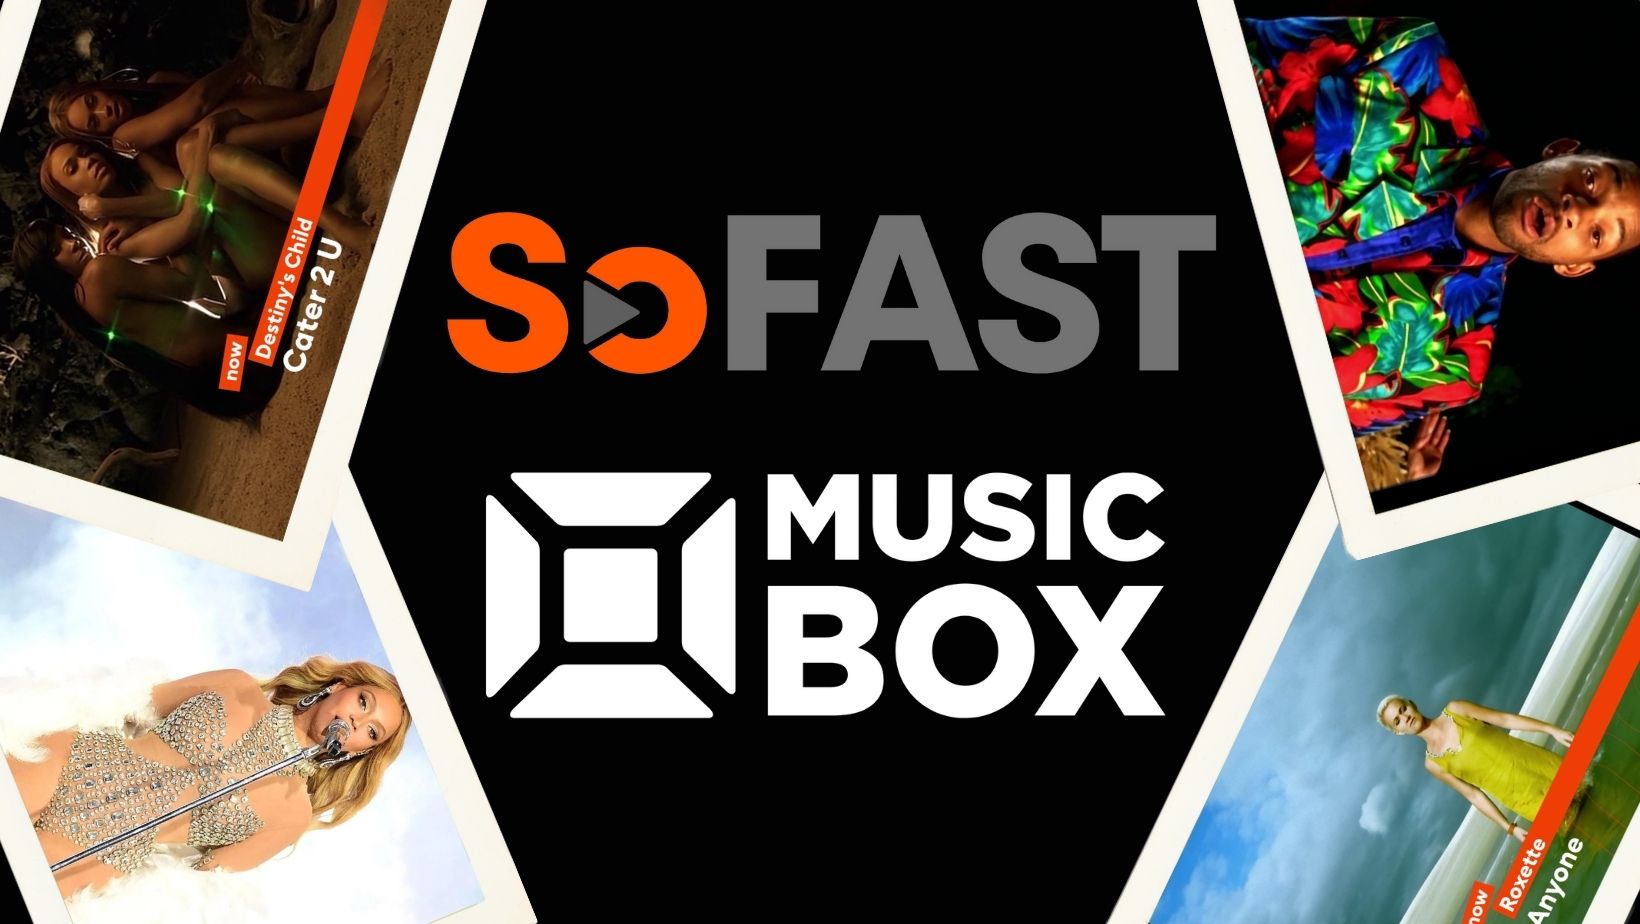 MUSIC BOX CLASSIC a FAST channel from Music Group distributed by SoFAST